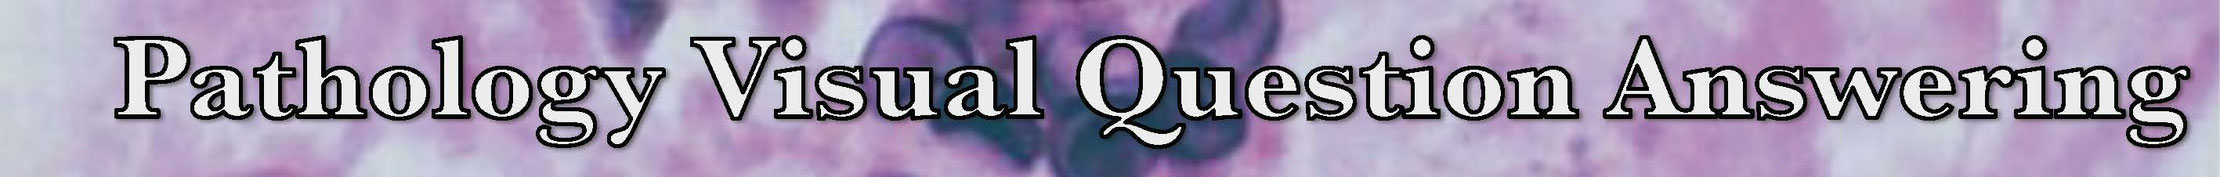 Pathology Visual Question Answering Banner